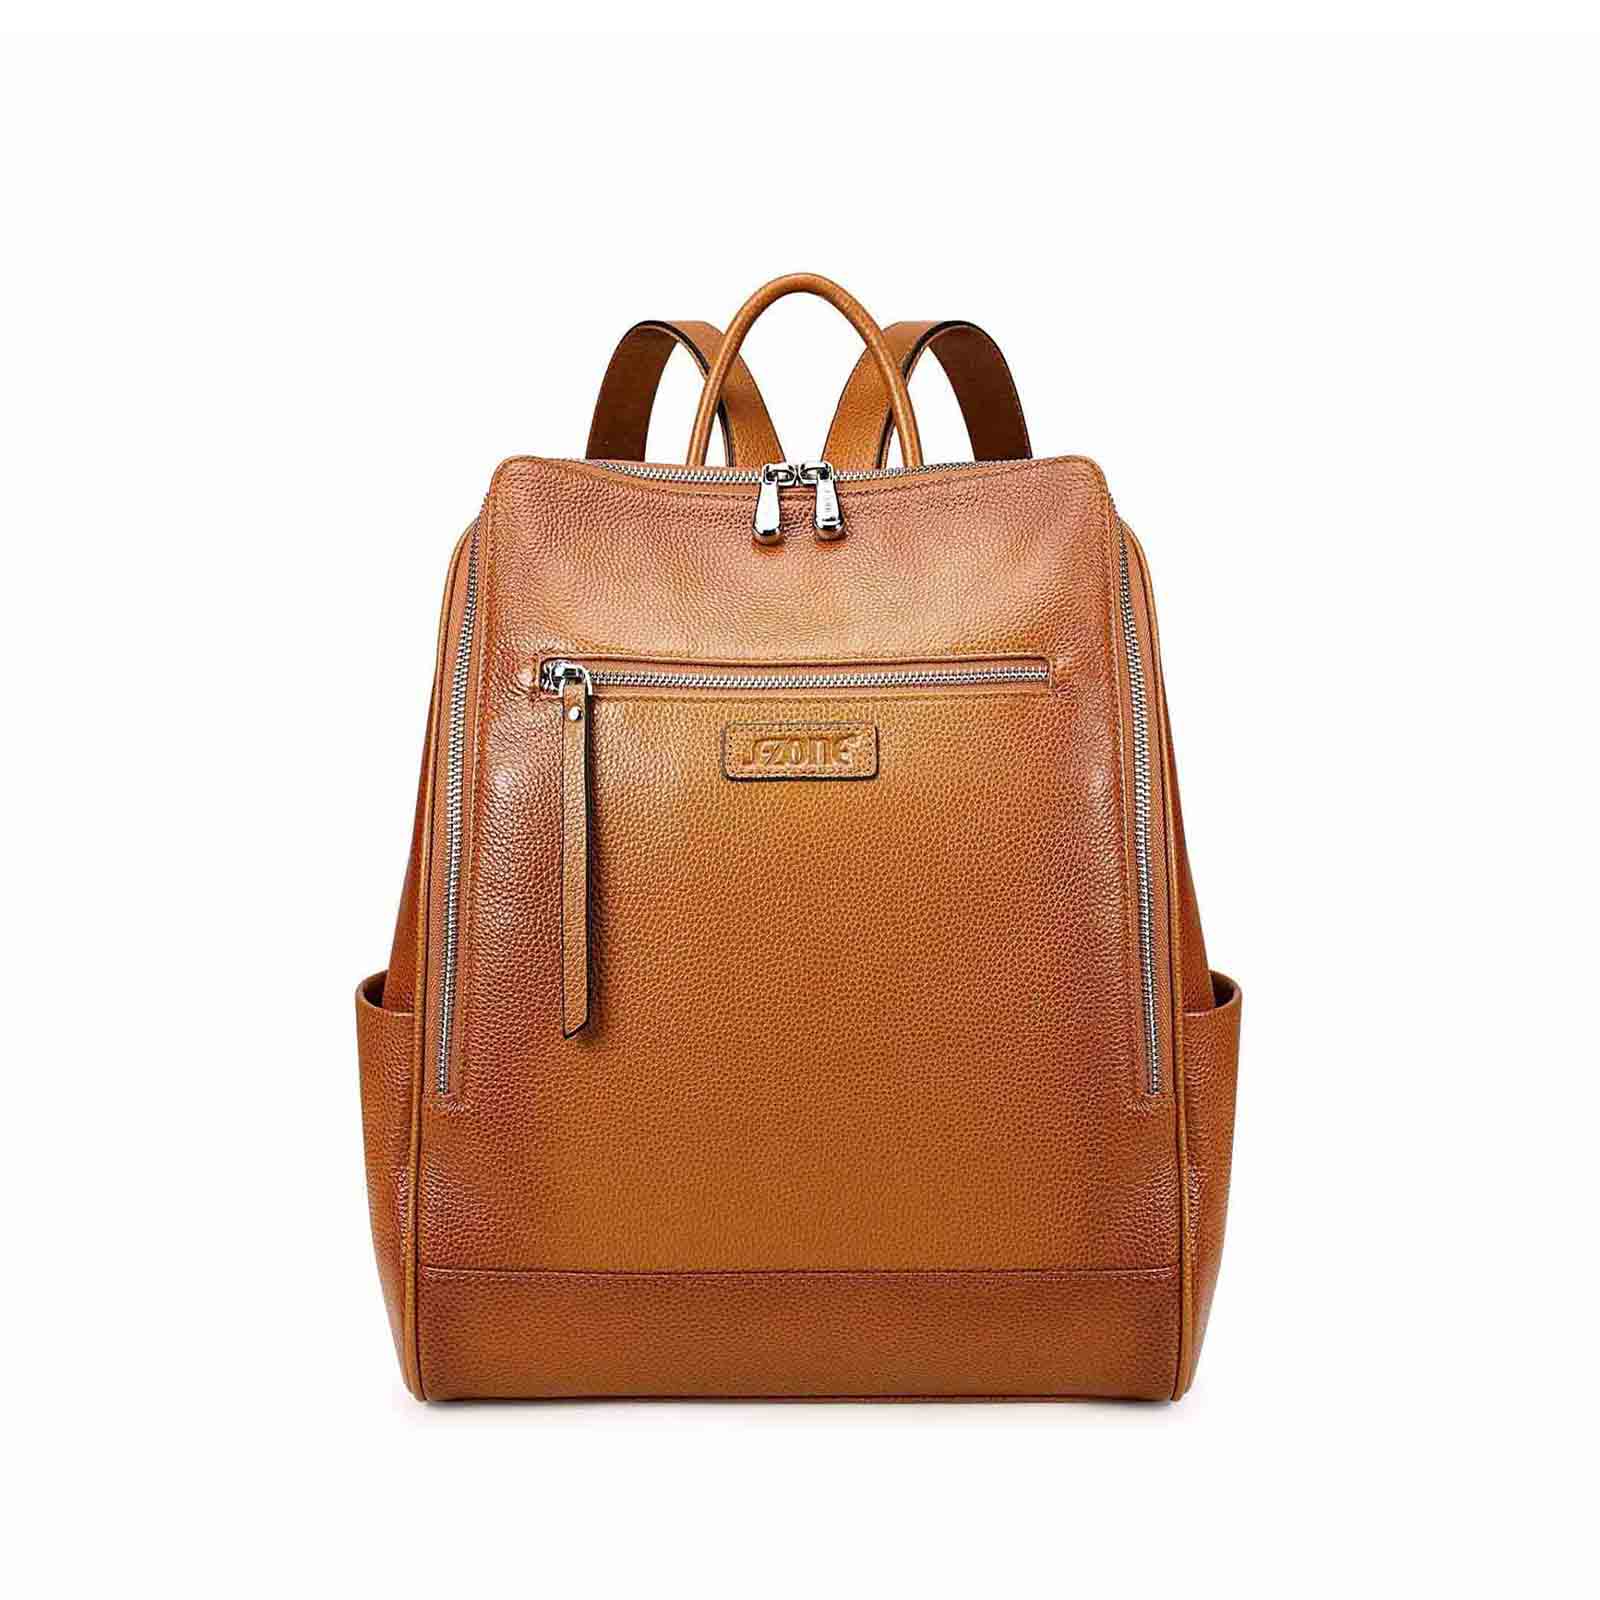 Relic by Fossil Backpack